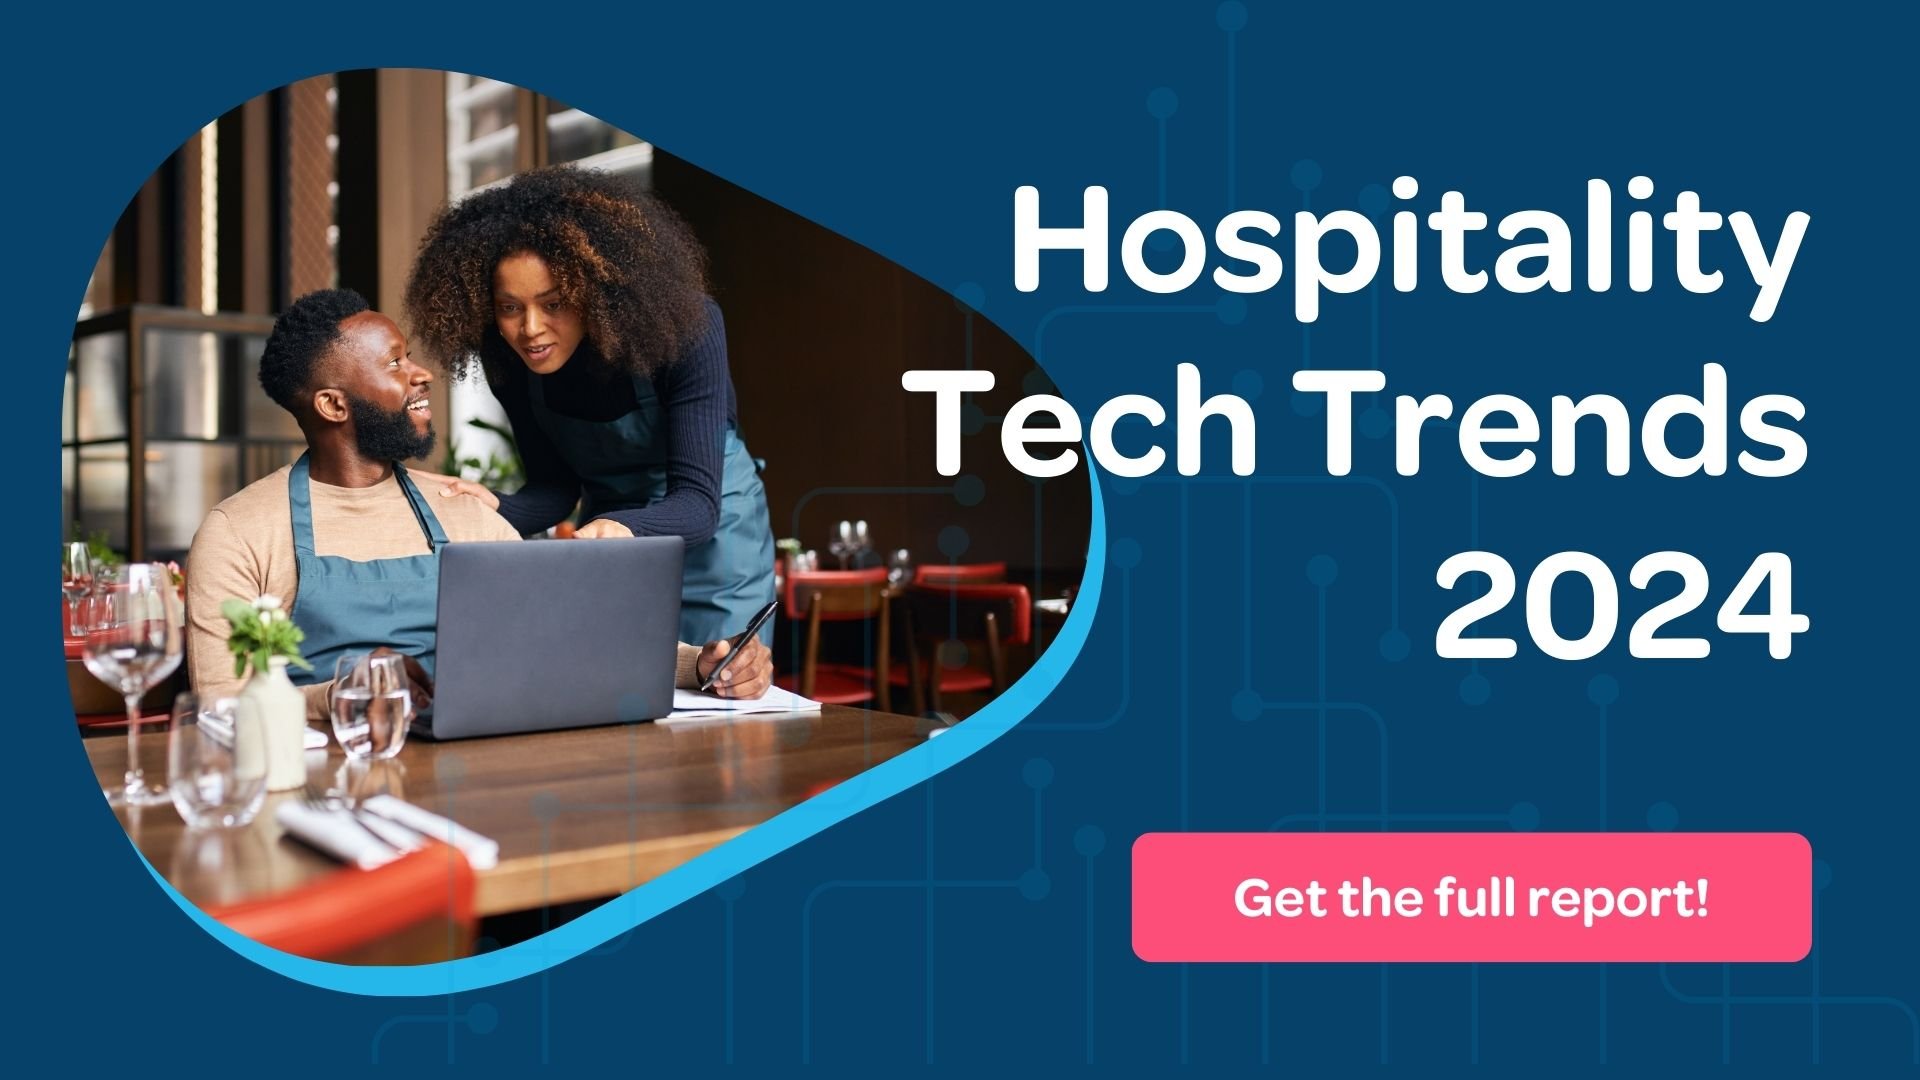 Call to action download ResDiary Hospitality Tech Trends Report 2024